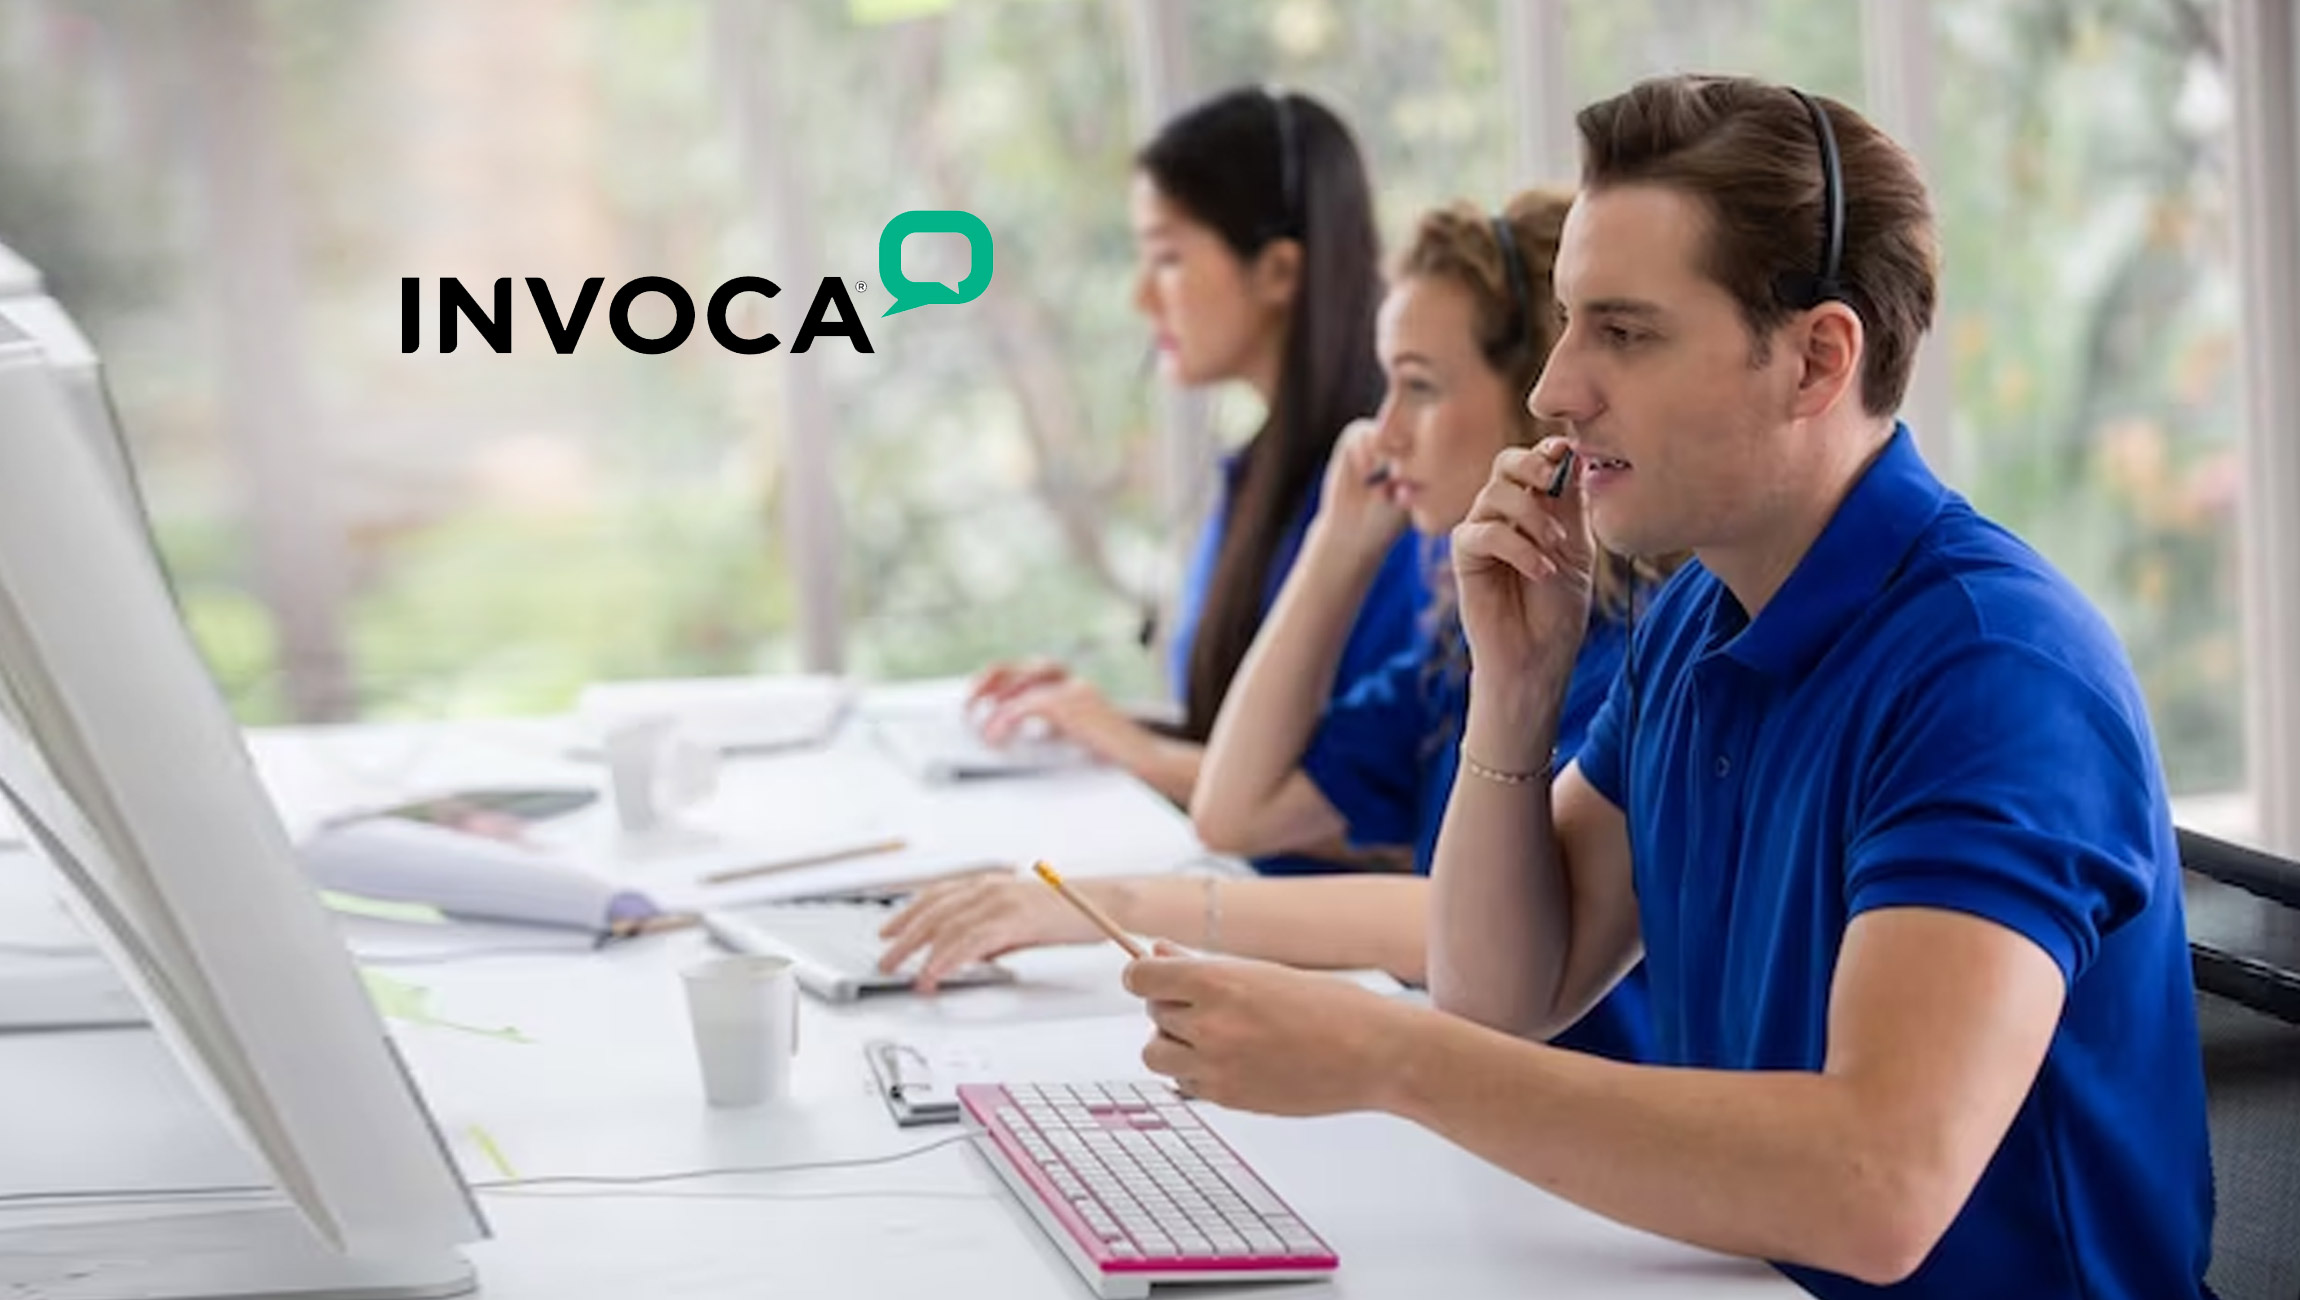 Invoca Report Finds 62% of Contact Center Managers Cannot Analyze Enough Calls to Evaluate Agent Performance Accurately